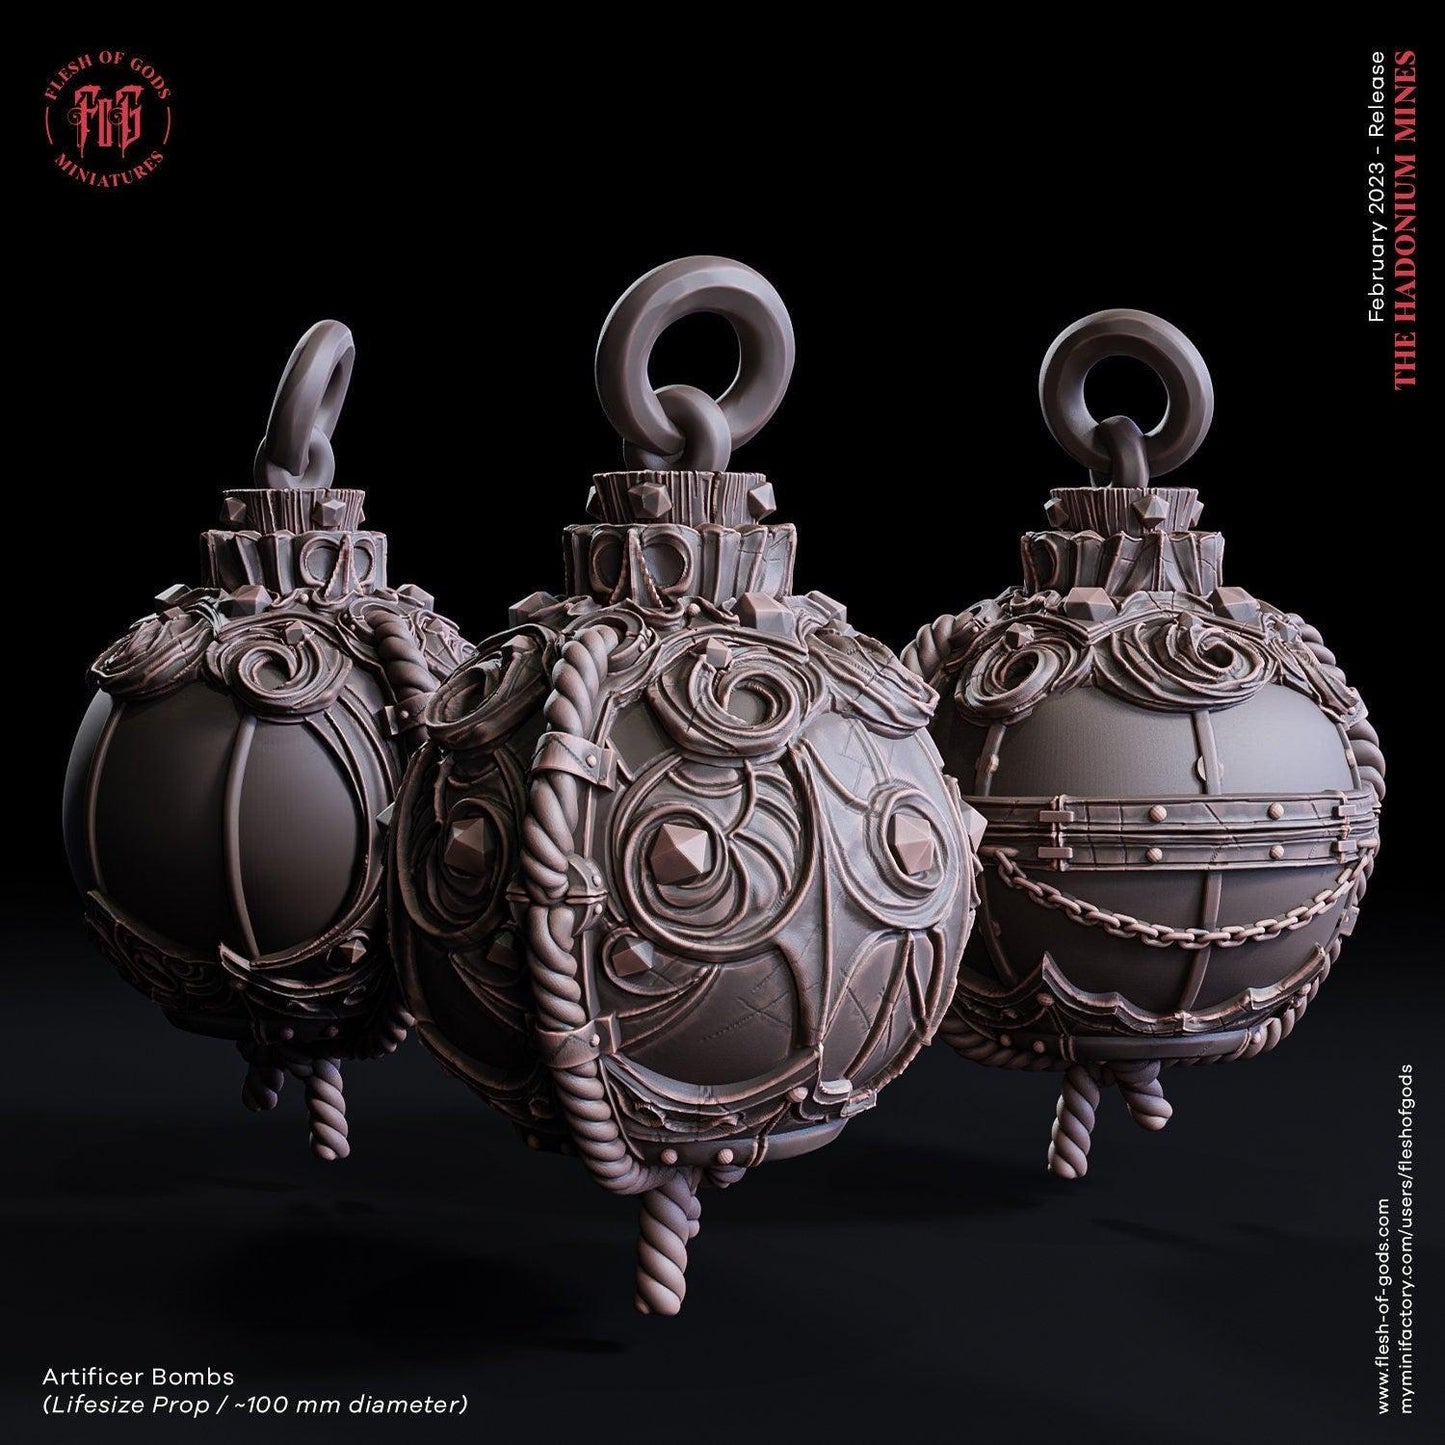 Large Bomb Display Props | Explosive DnD Decor for Display - Plague Miniatures shop for DnD Miniatures